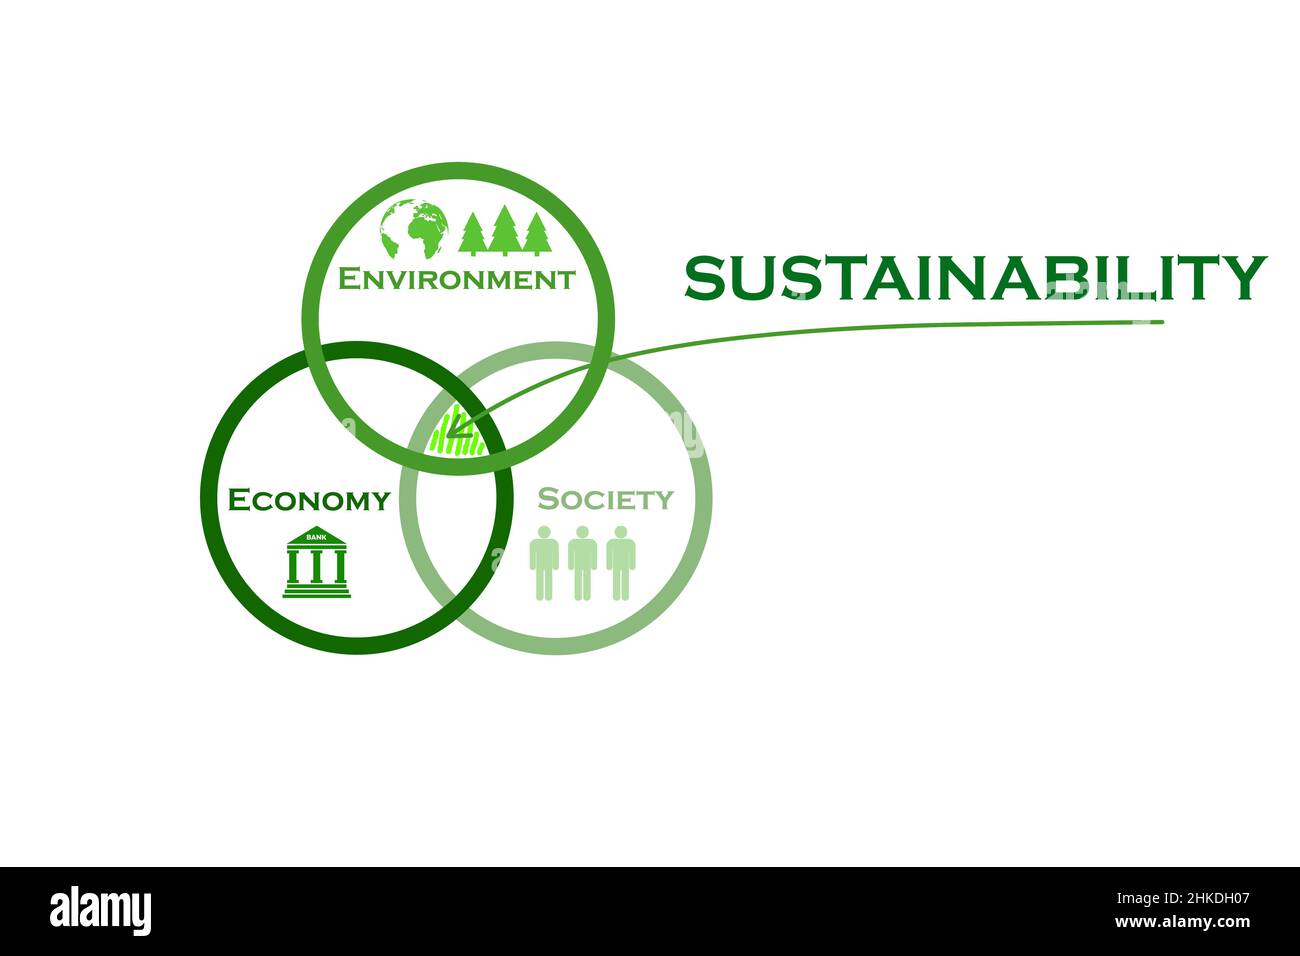 Illustration of Sustainability Concept as the intersection of Environment, Society and Economy circles. Stock Photo